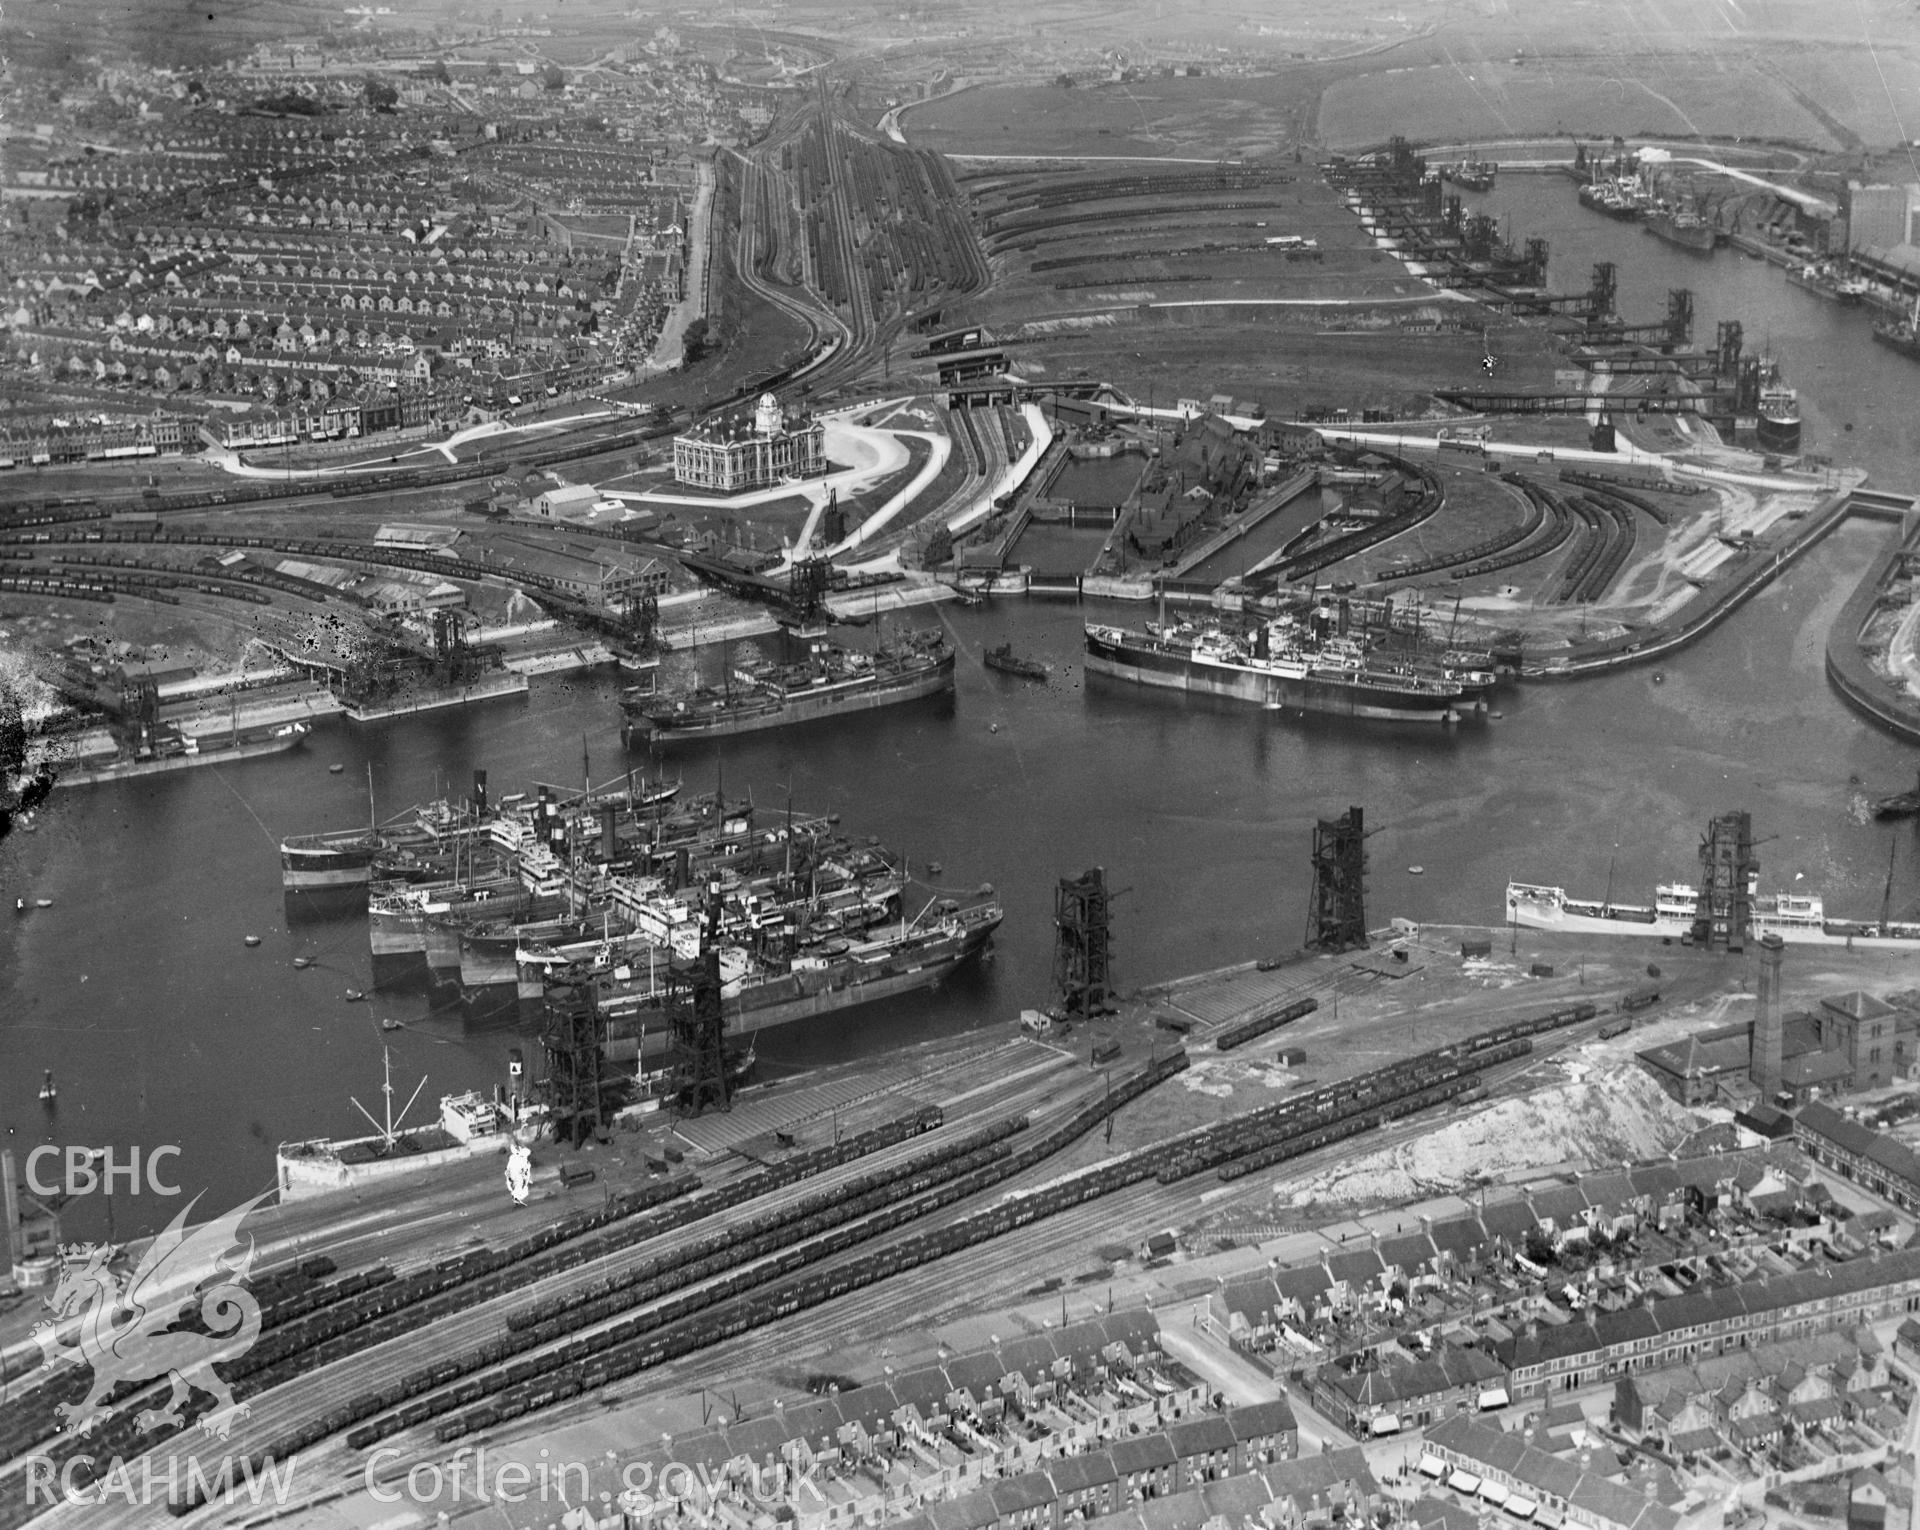 General view of Barry showing docks, oblique aerial view. 5?x4? black and white glass plate negative.